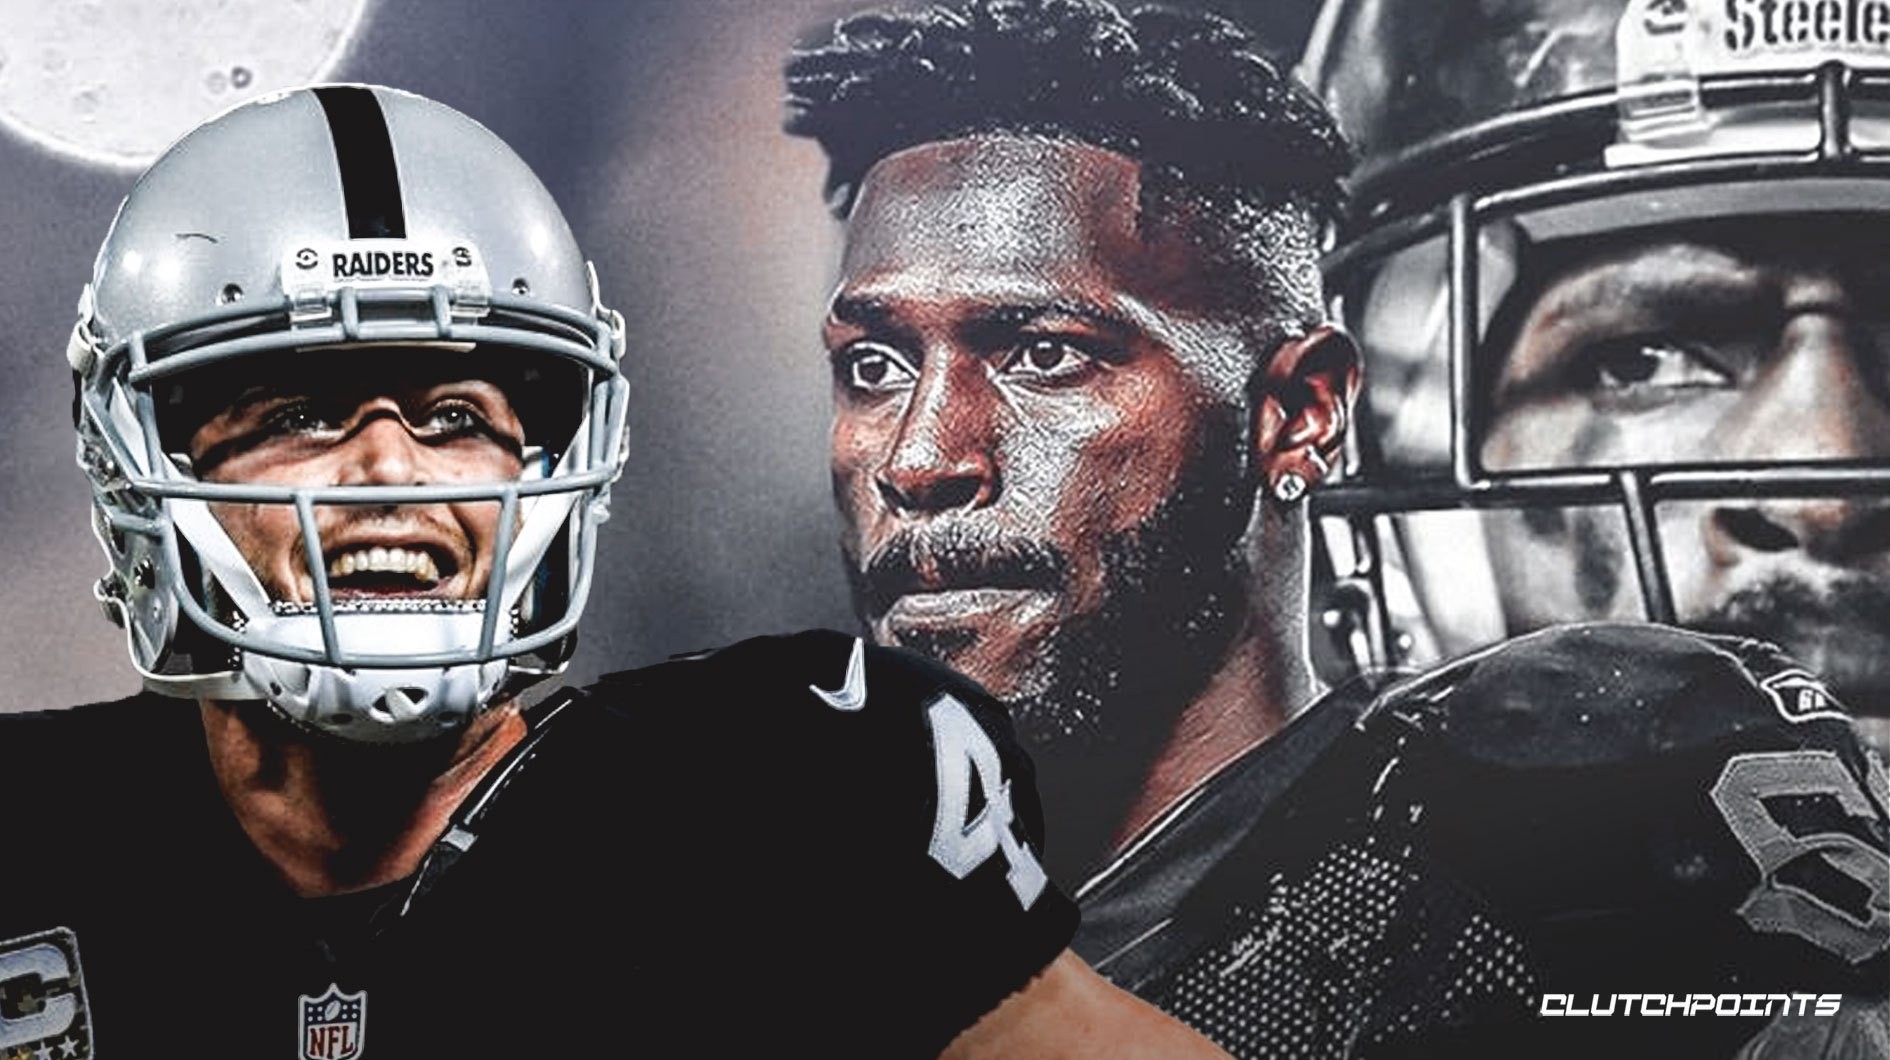 Tracking the Raiders offseason moves